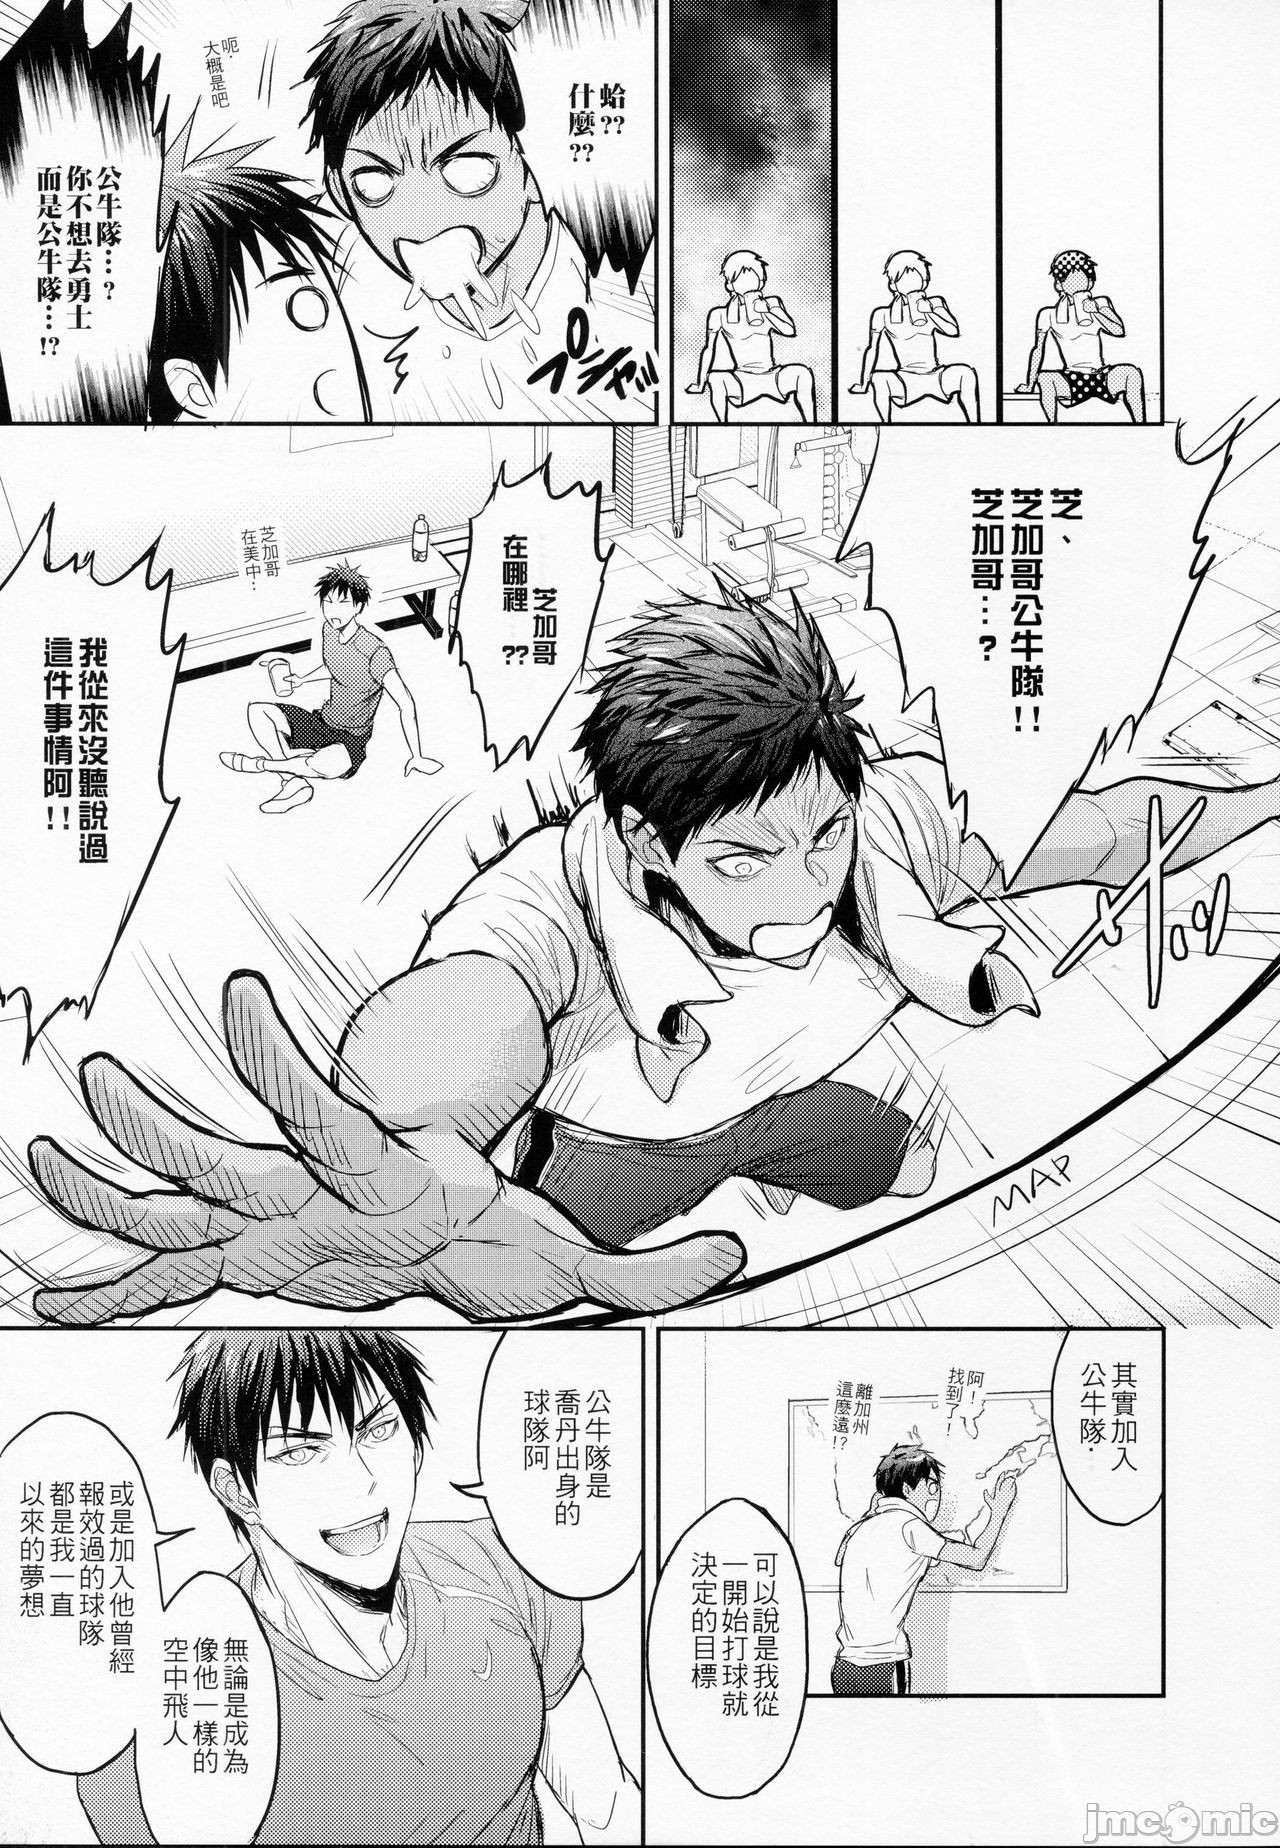 【This is how we WORK IT OUT (黒子のバスケ)[腐漫]】漫画-（第1话）章节漫画下拉式图片-8.jpg